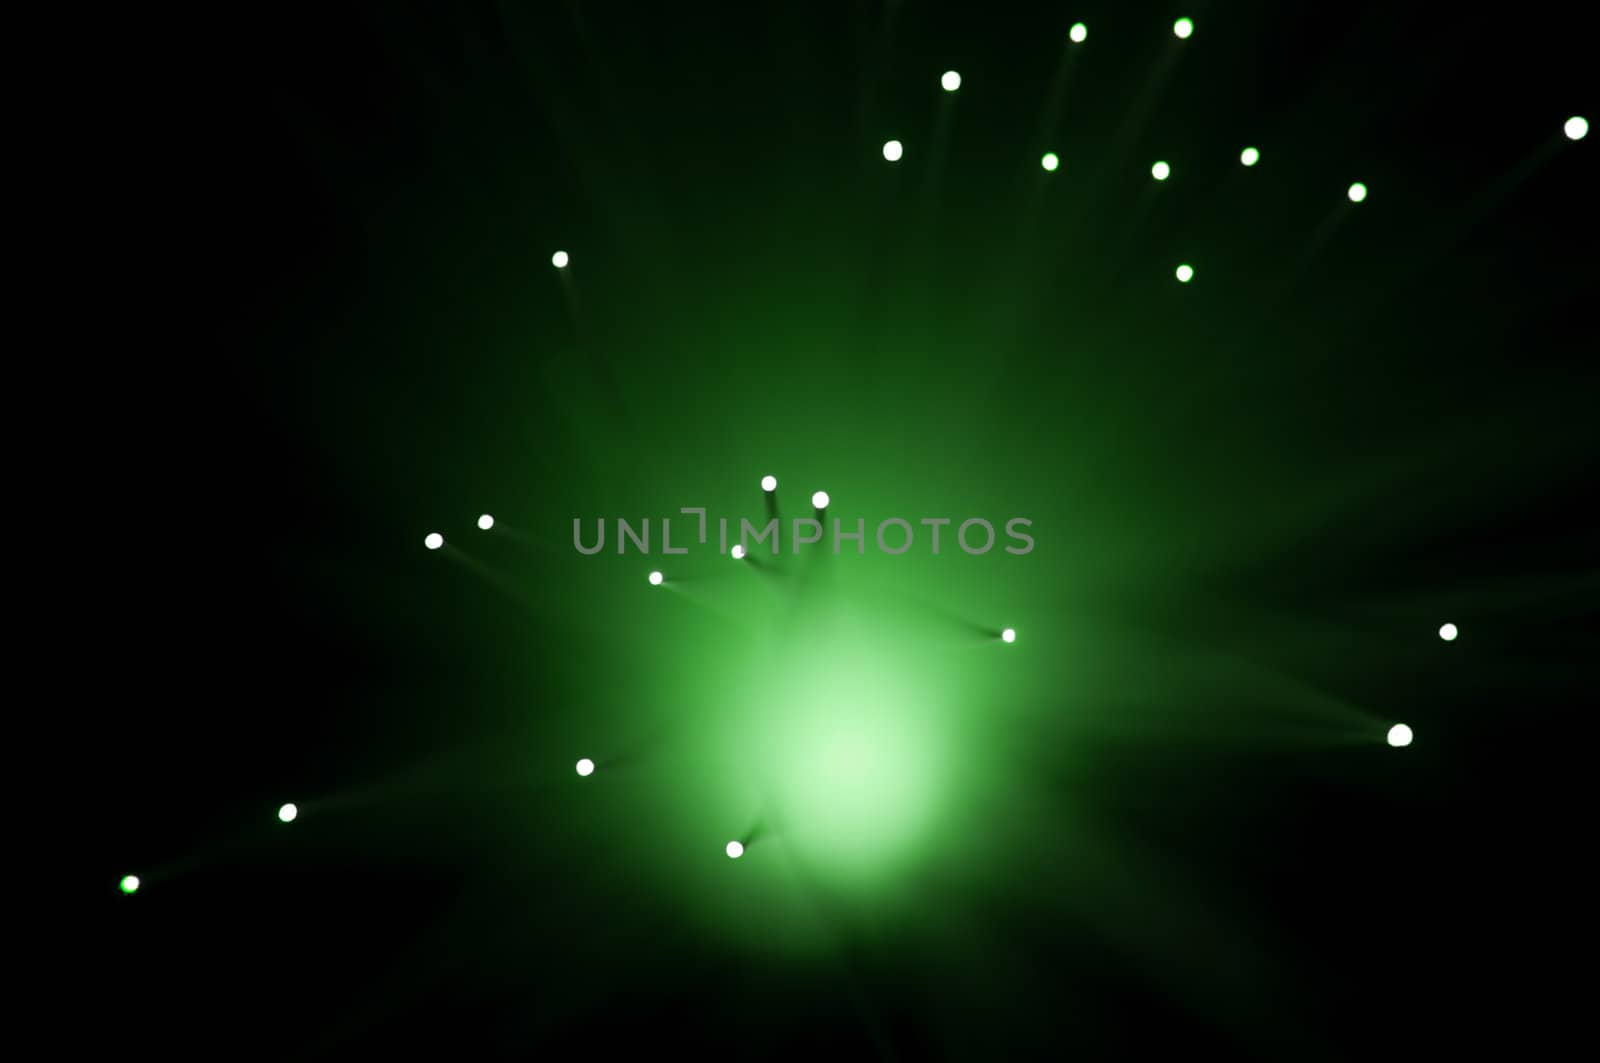 Abstract style capturing the ends of green illuminated fibre optic strands against black.